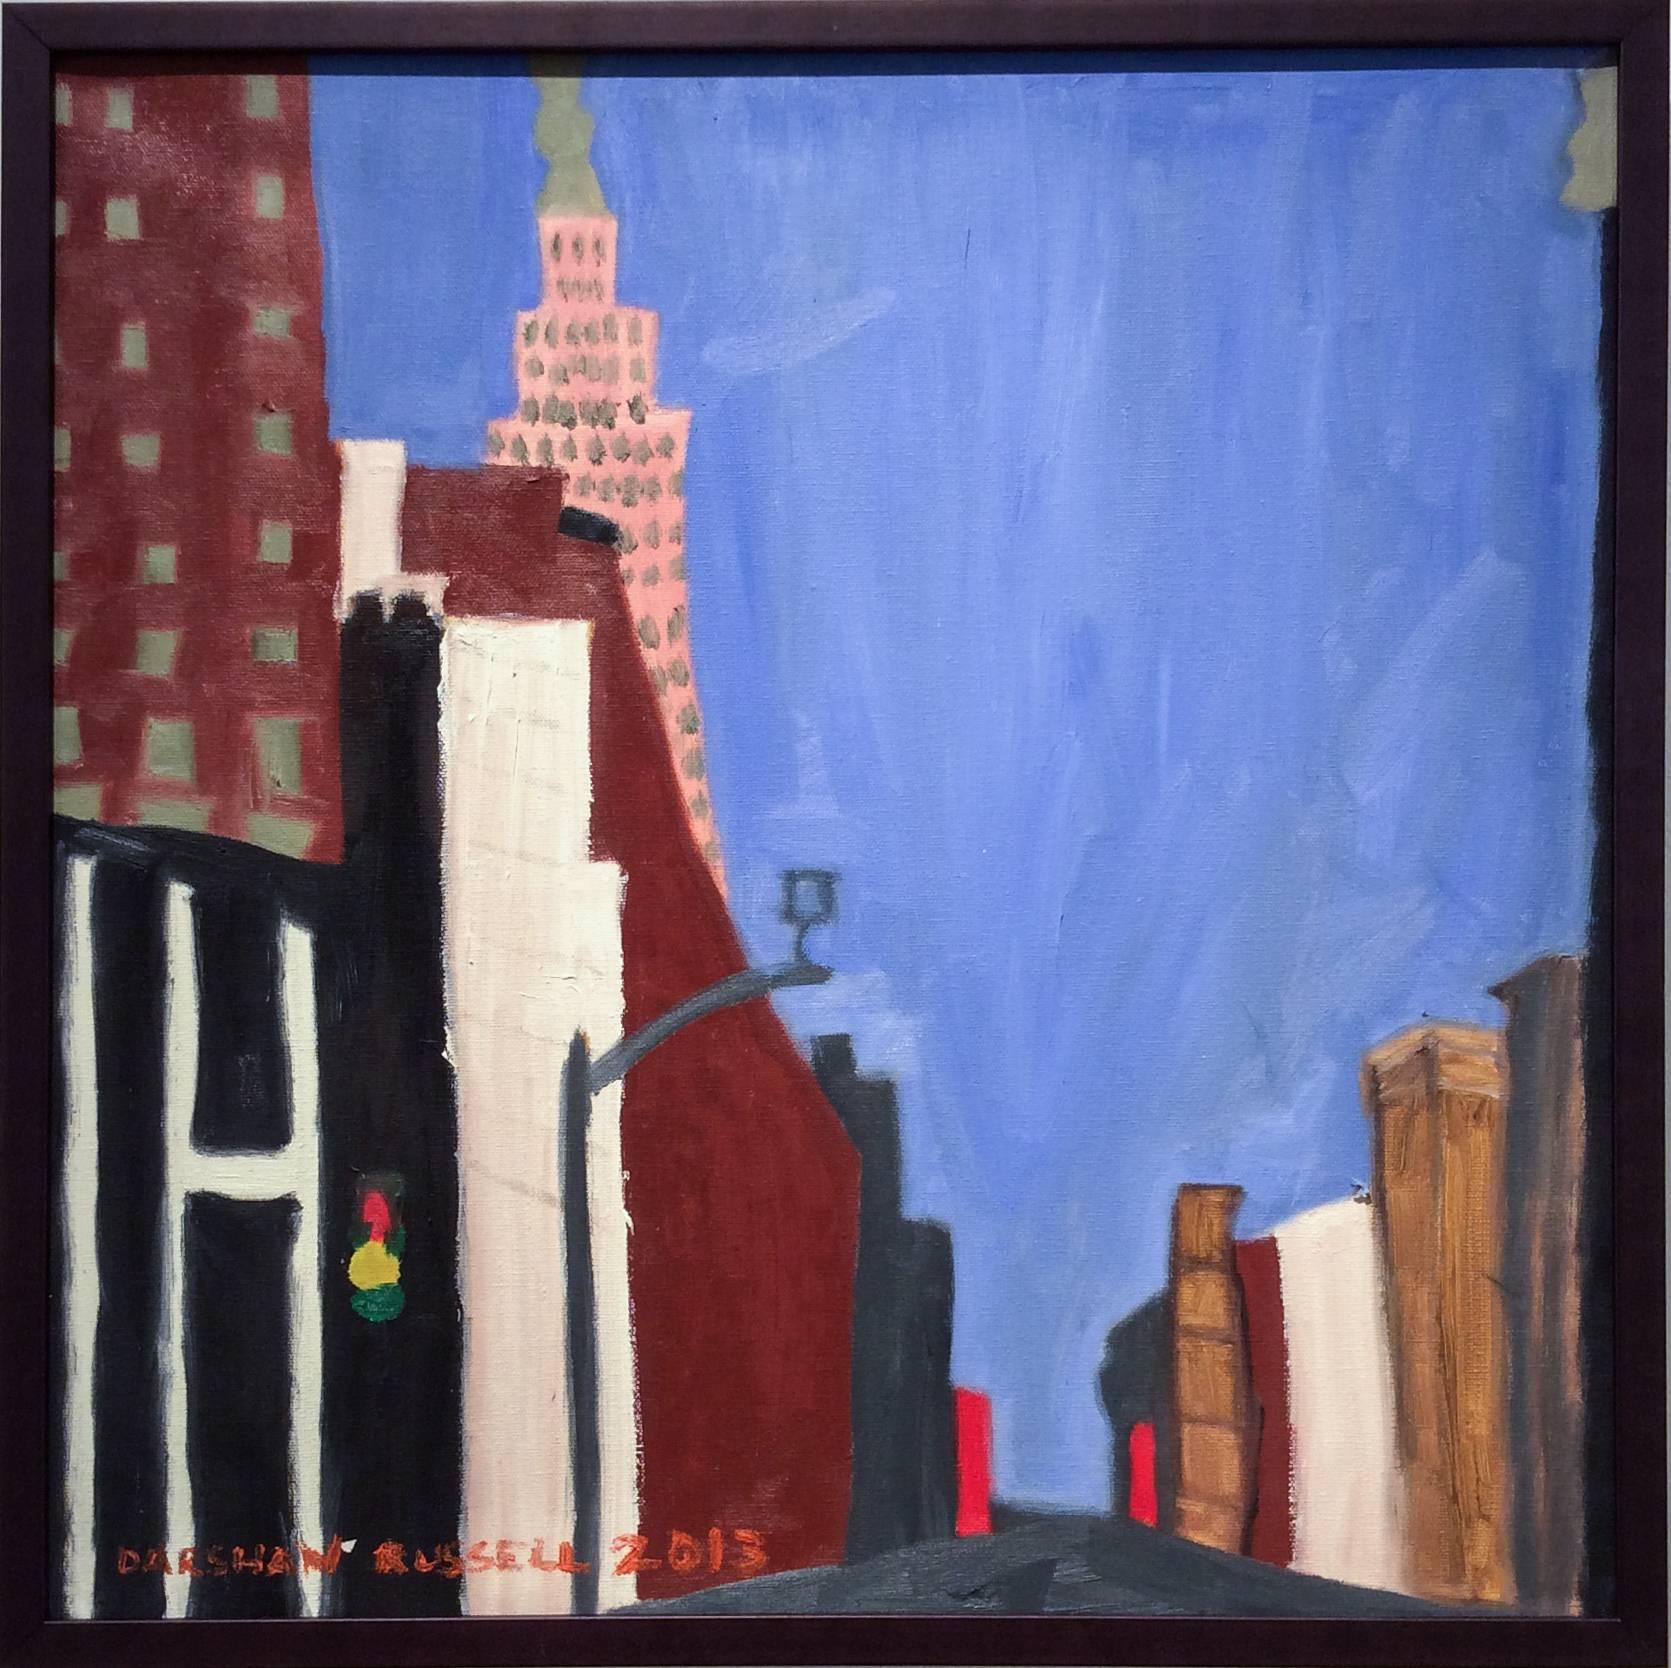 Empire State Building: Modern, Naive Style New York City Landscape - Painting by Darshan Russell